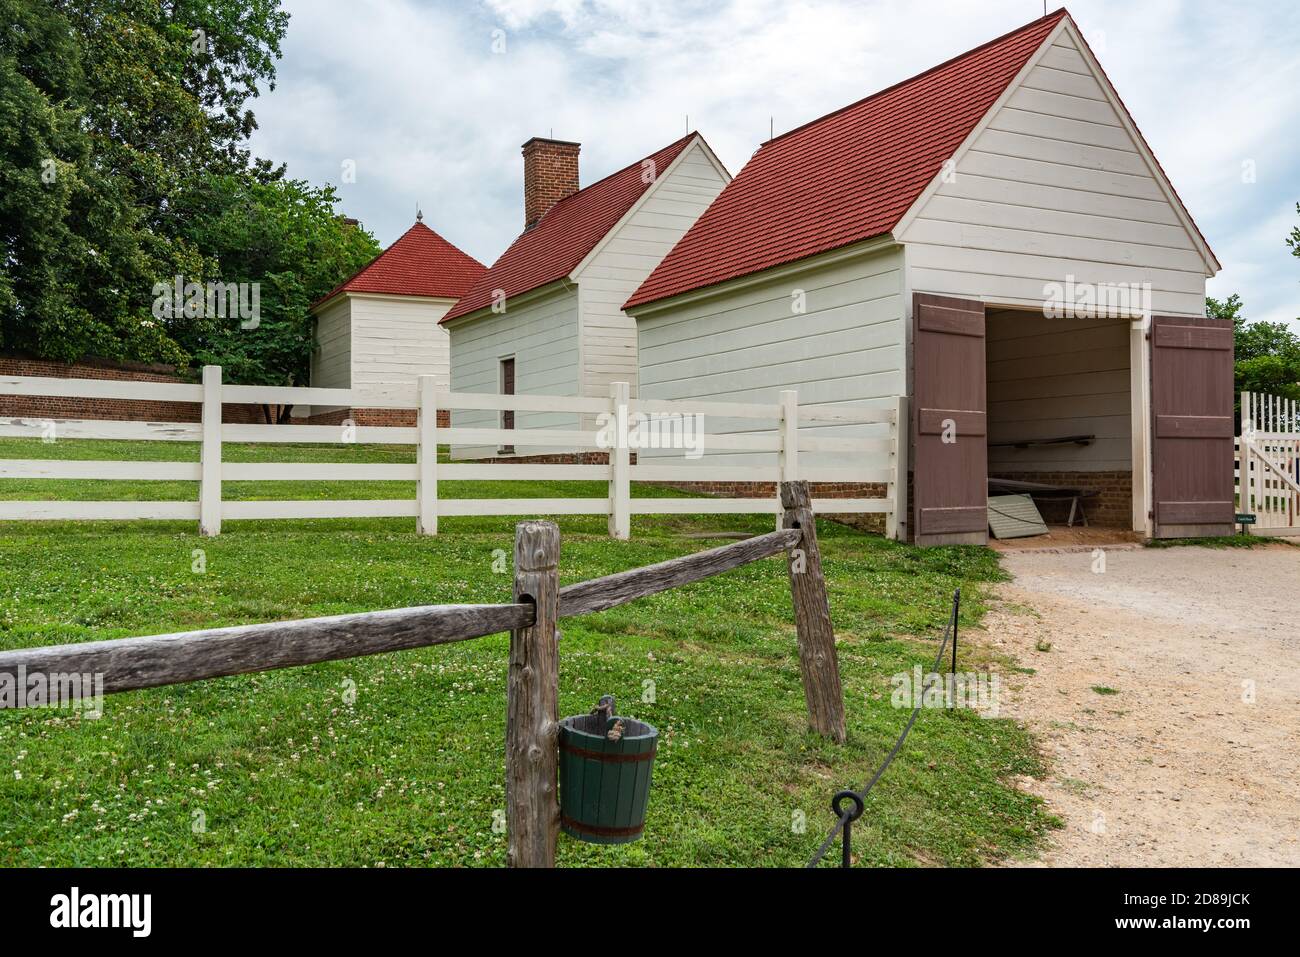 The whitewashed Coach House, Wash House and Smokehouse lining the South Lane at Mount Vernon. Stock Photo